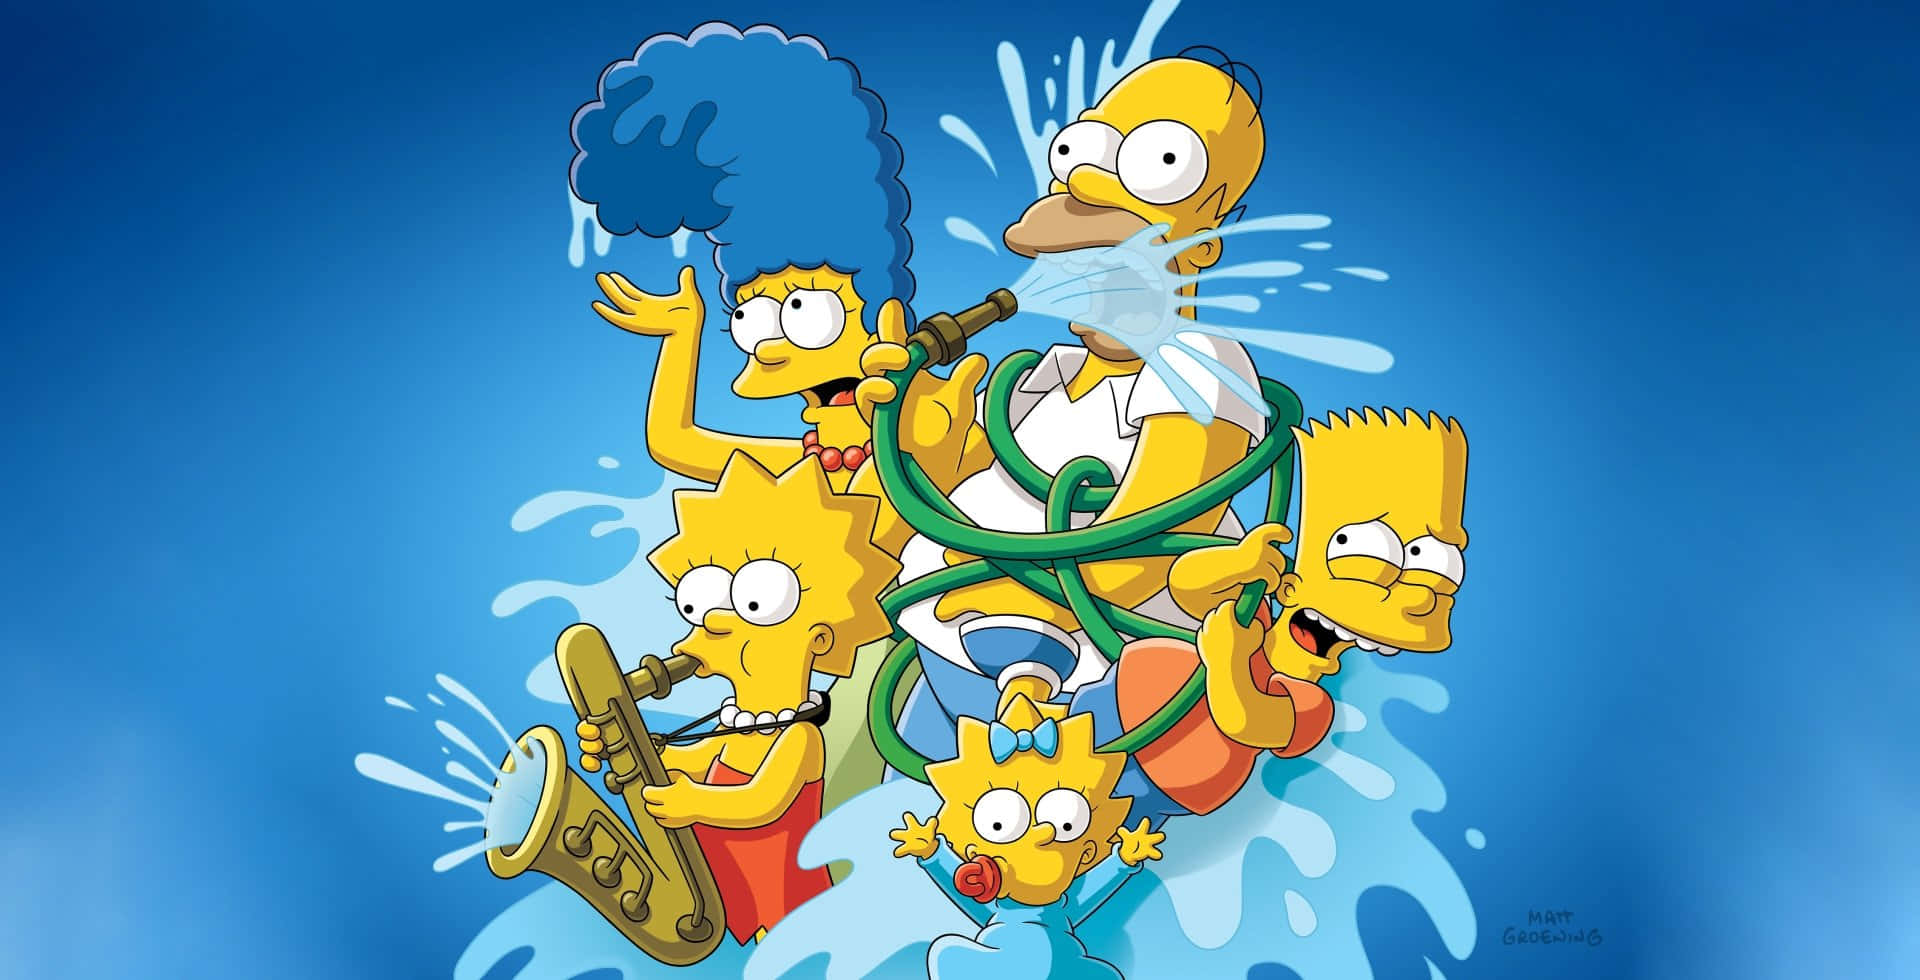 "Upgrade Your Family PC with the Simpsons PC!" Wallpaper